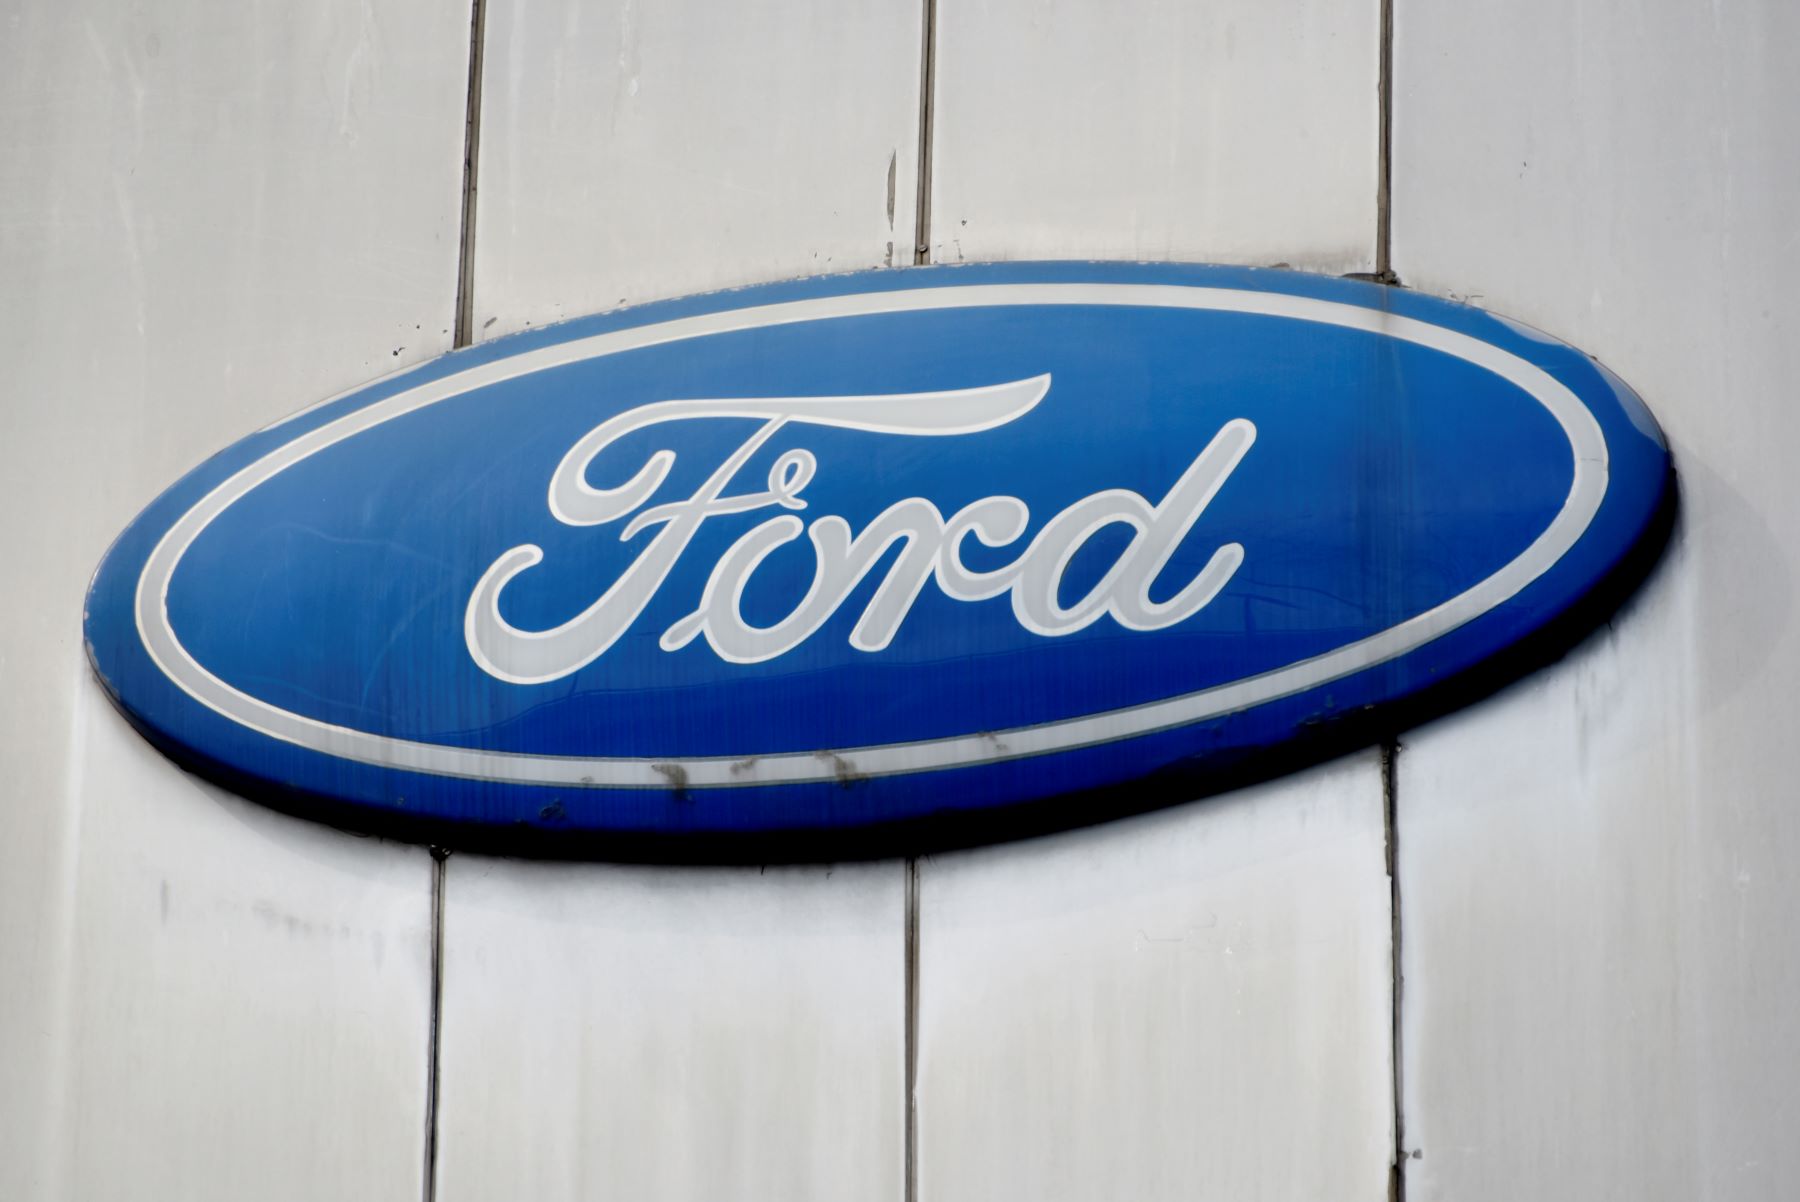 The Ford logo seen in Kolkata, India, where the American automaker just announced it was ending car production operations